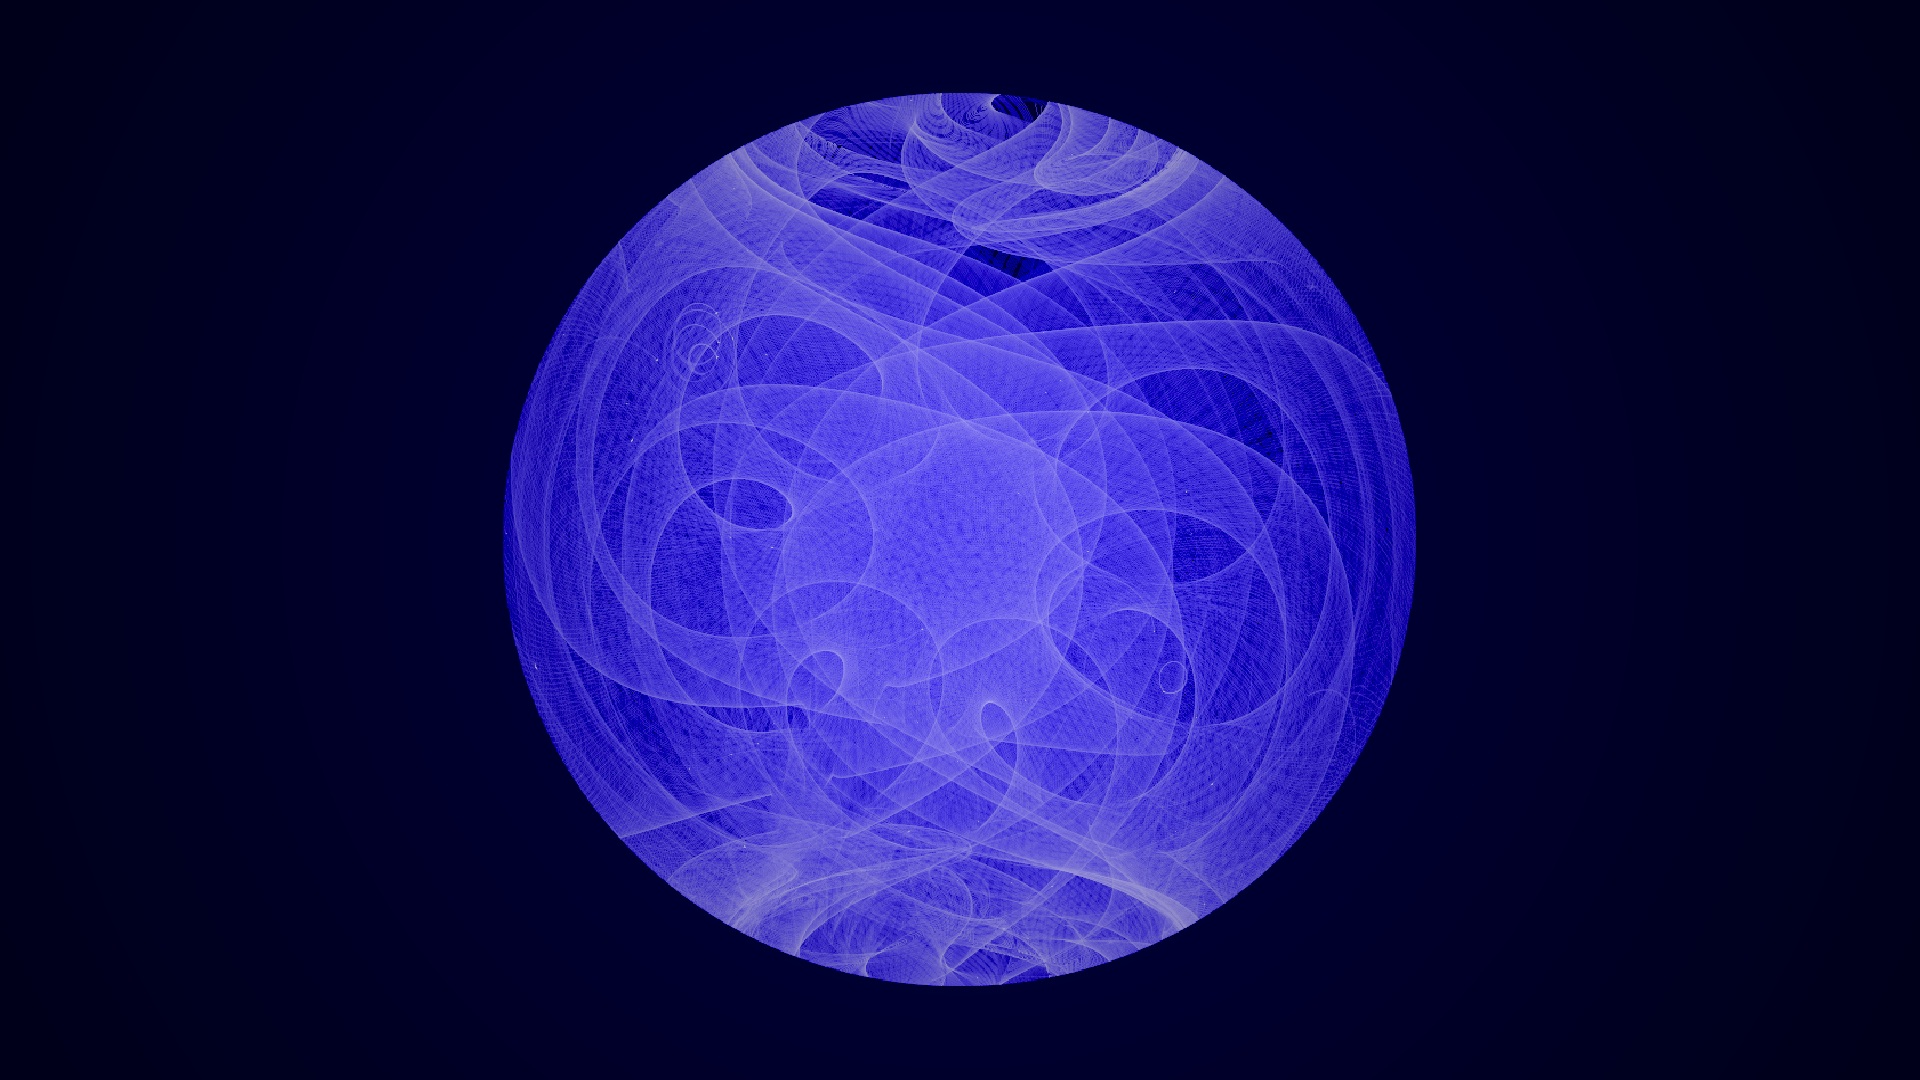 The Vela pulsar outlines a fascinating pattern in this movie showing 51 months of position and exposure data from Fermi's Large Area Telescope (LAT). The pattern reflects numerous motions of the spacecraft, including its orbit around Earth, the precession of its orbital plane, the manner in which the LAT nods north and south on alternate orbits, and more. The movie renders Vela's position in a fisheye perspective, where the middle of the pattern corresponds to the central and most sensitive portion of the LAT's field of view. The edge of the pattern is 90 degrees away from the center and well beyond what scientists regard as the effective limit of the LAT's vision. Better knowledge of how the LAT's sensitivity changes across its field of view helps Fermi scientists better understand both the instrument and the data it returns.Credit: NASA/DOE/Fermi LAT CollaborationFor complete transcript, click here.